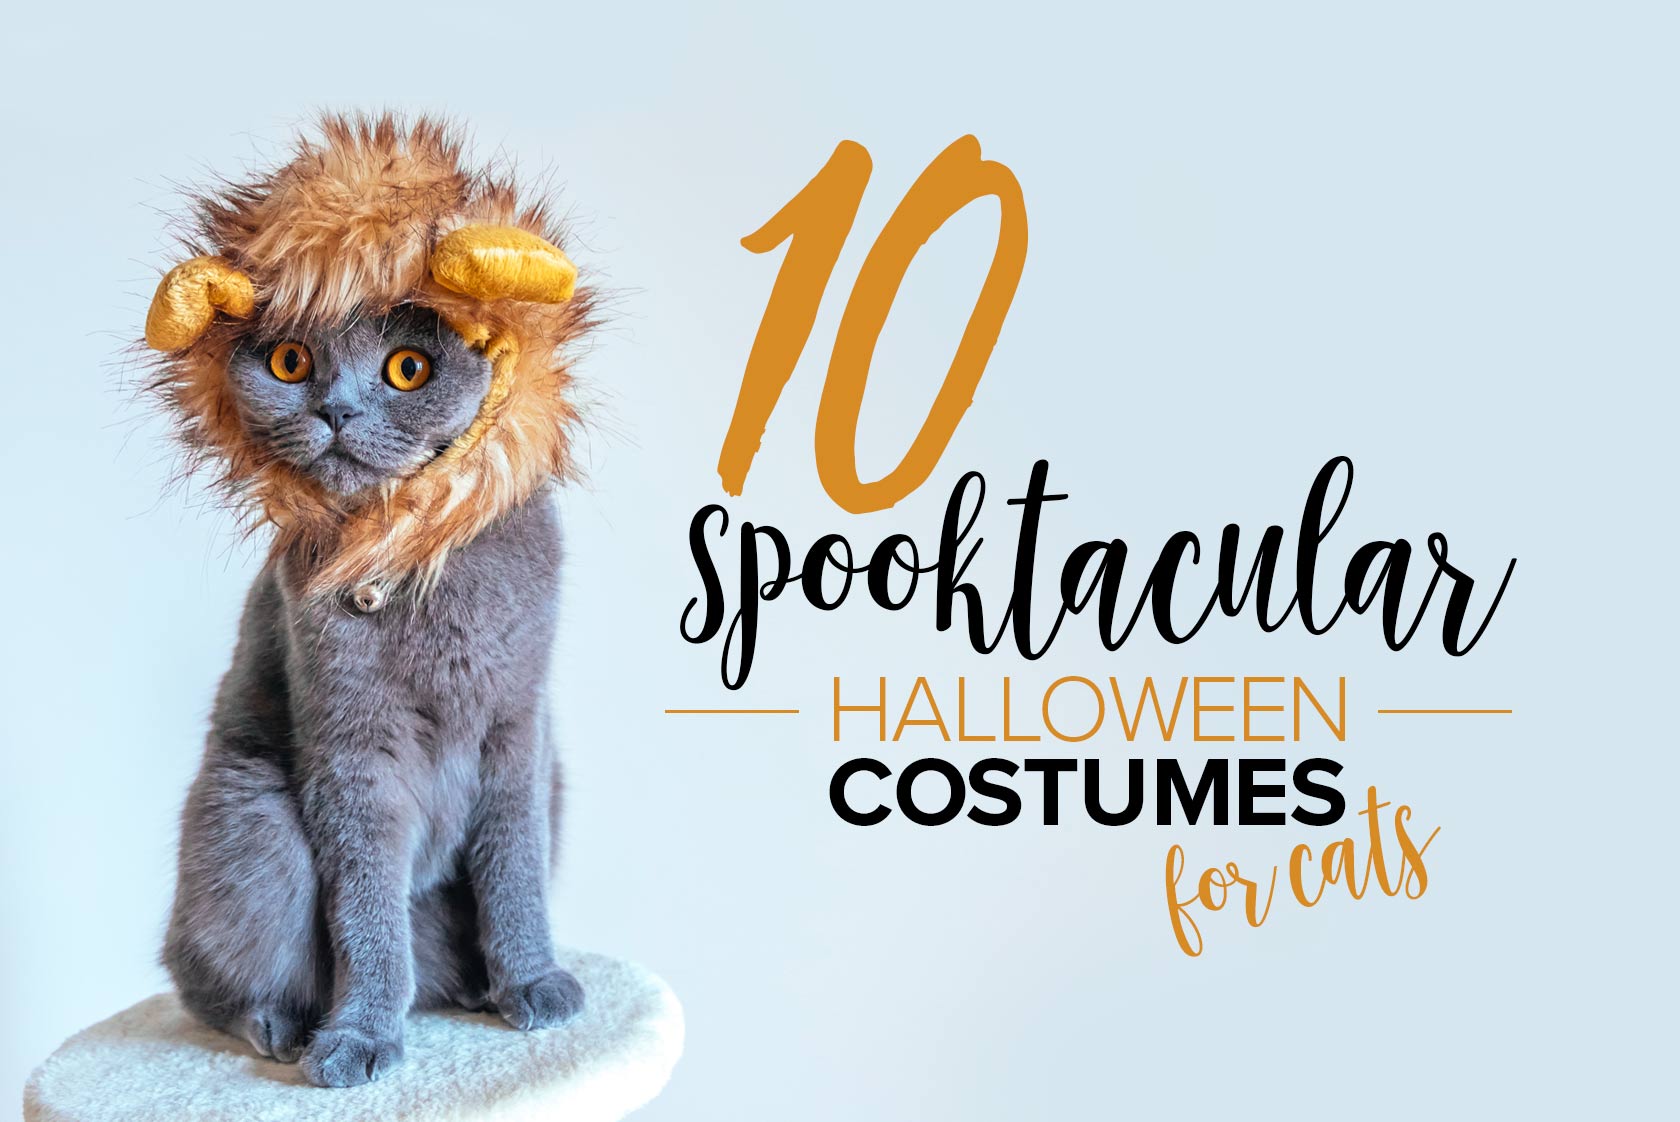 Oxyfresh - 10 halloween costumes for cats